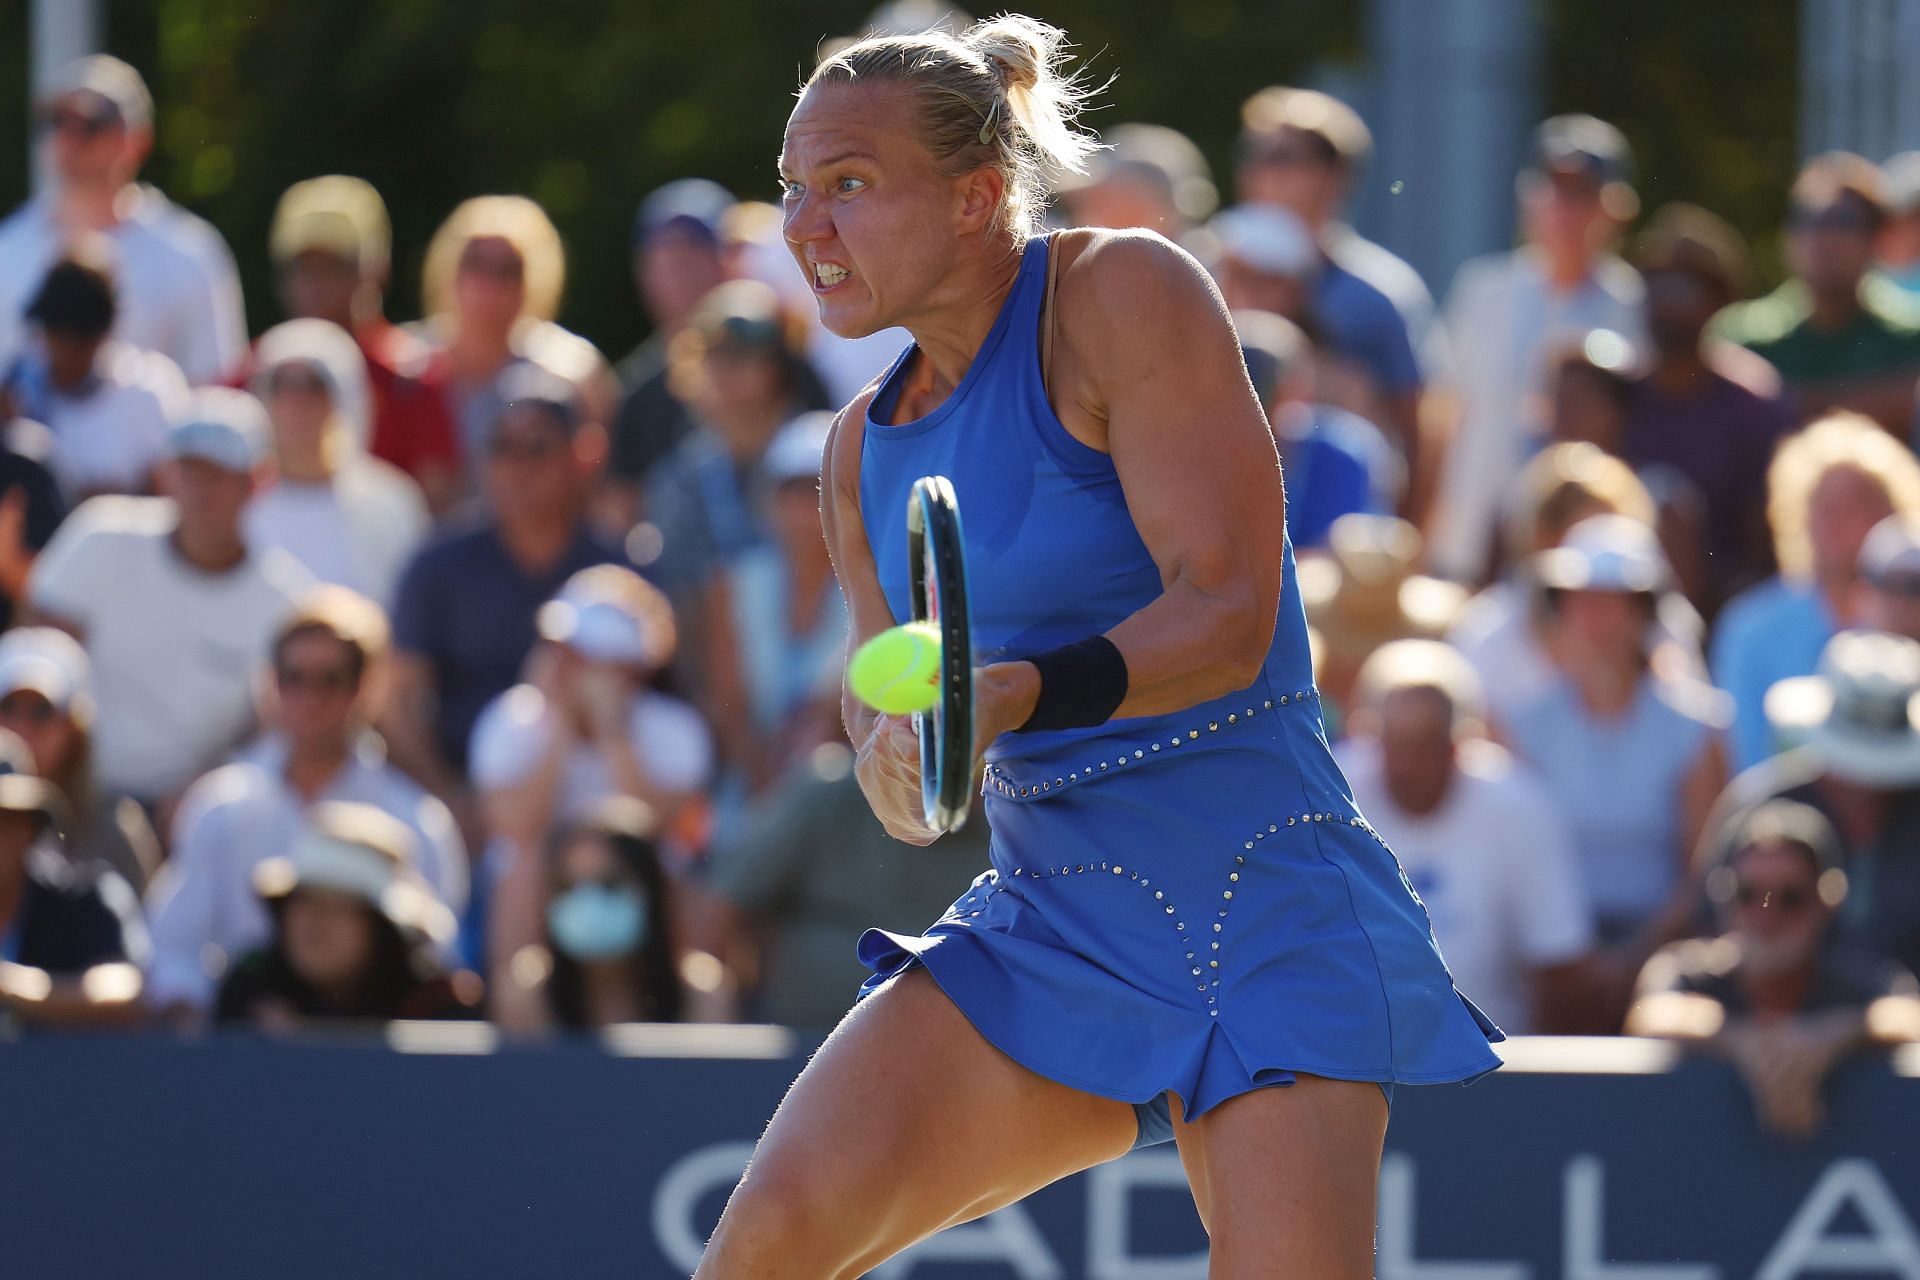 Kaia Kanepi will look to make her second final of the season